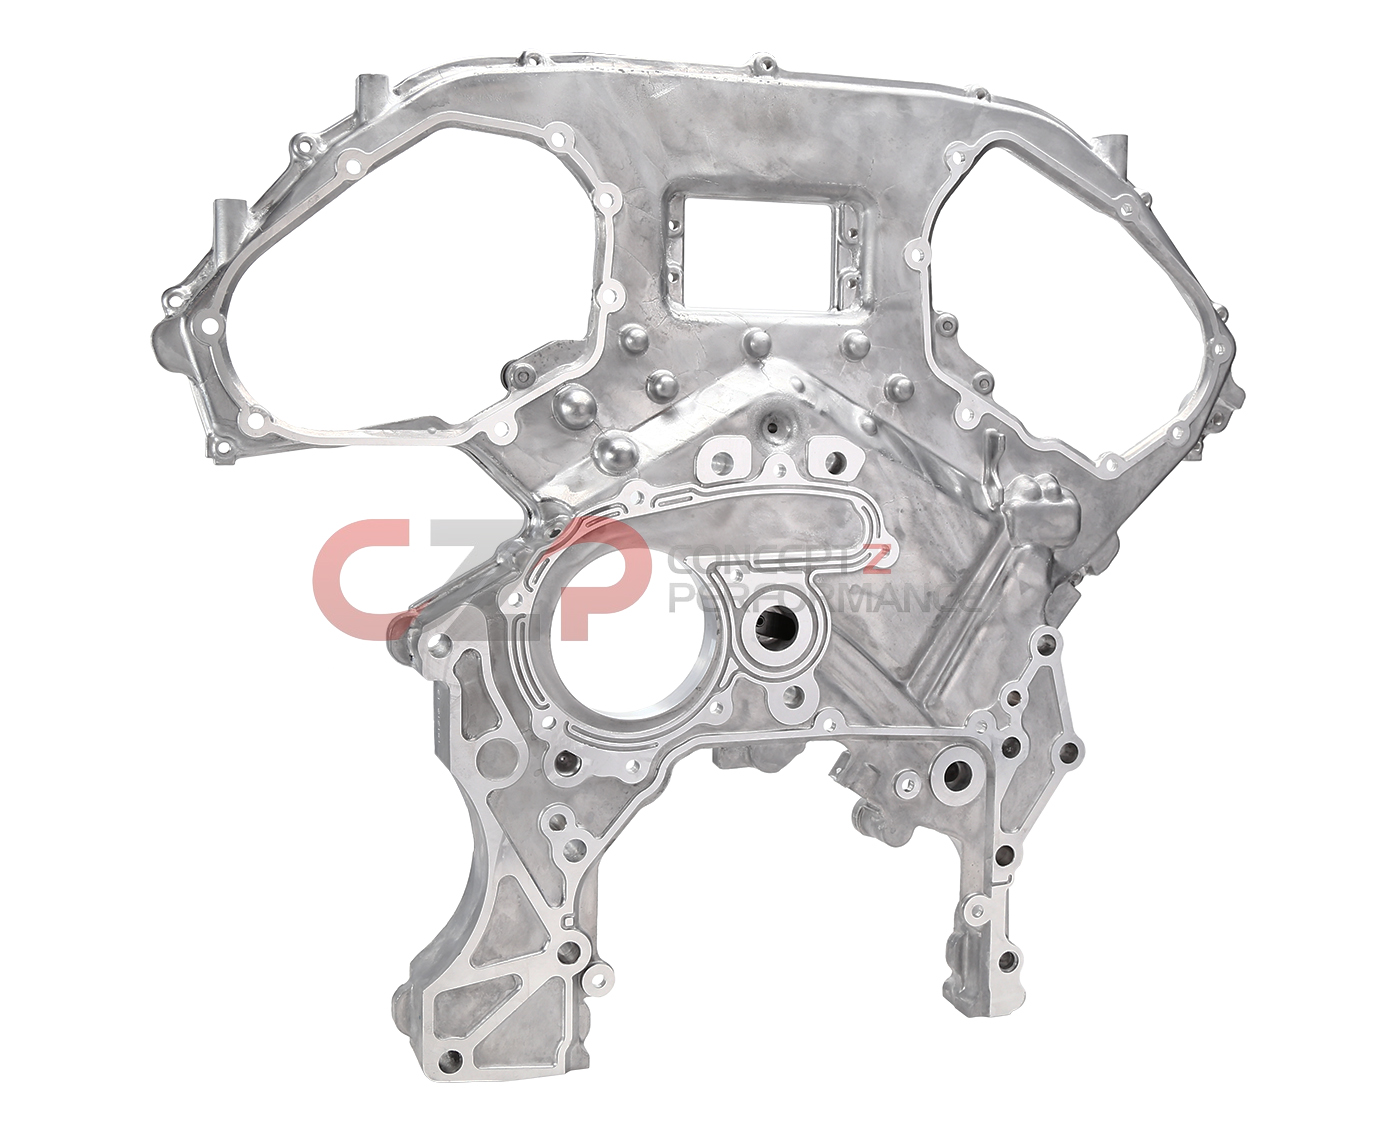 Nissan OEM Timing Chain Engine Cover, Rear - Nissan 370Z 09+ Z34